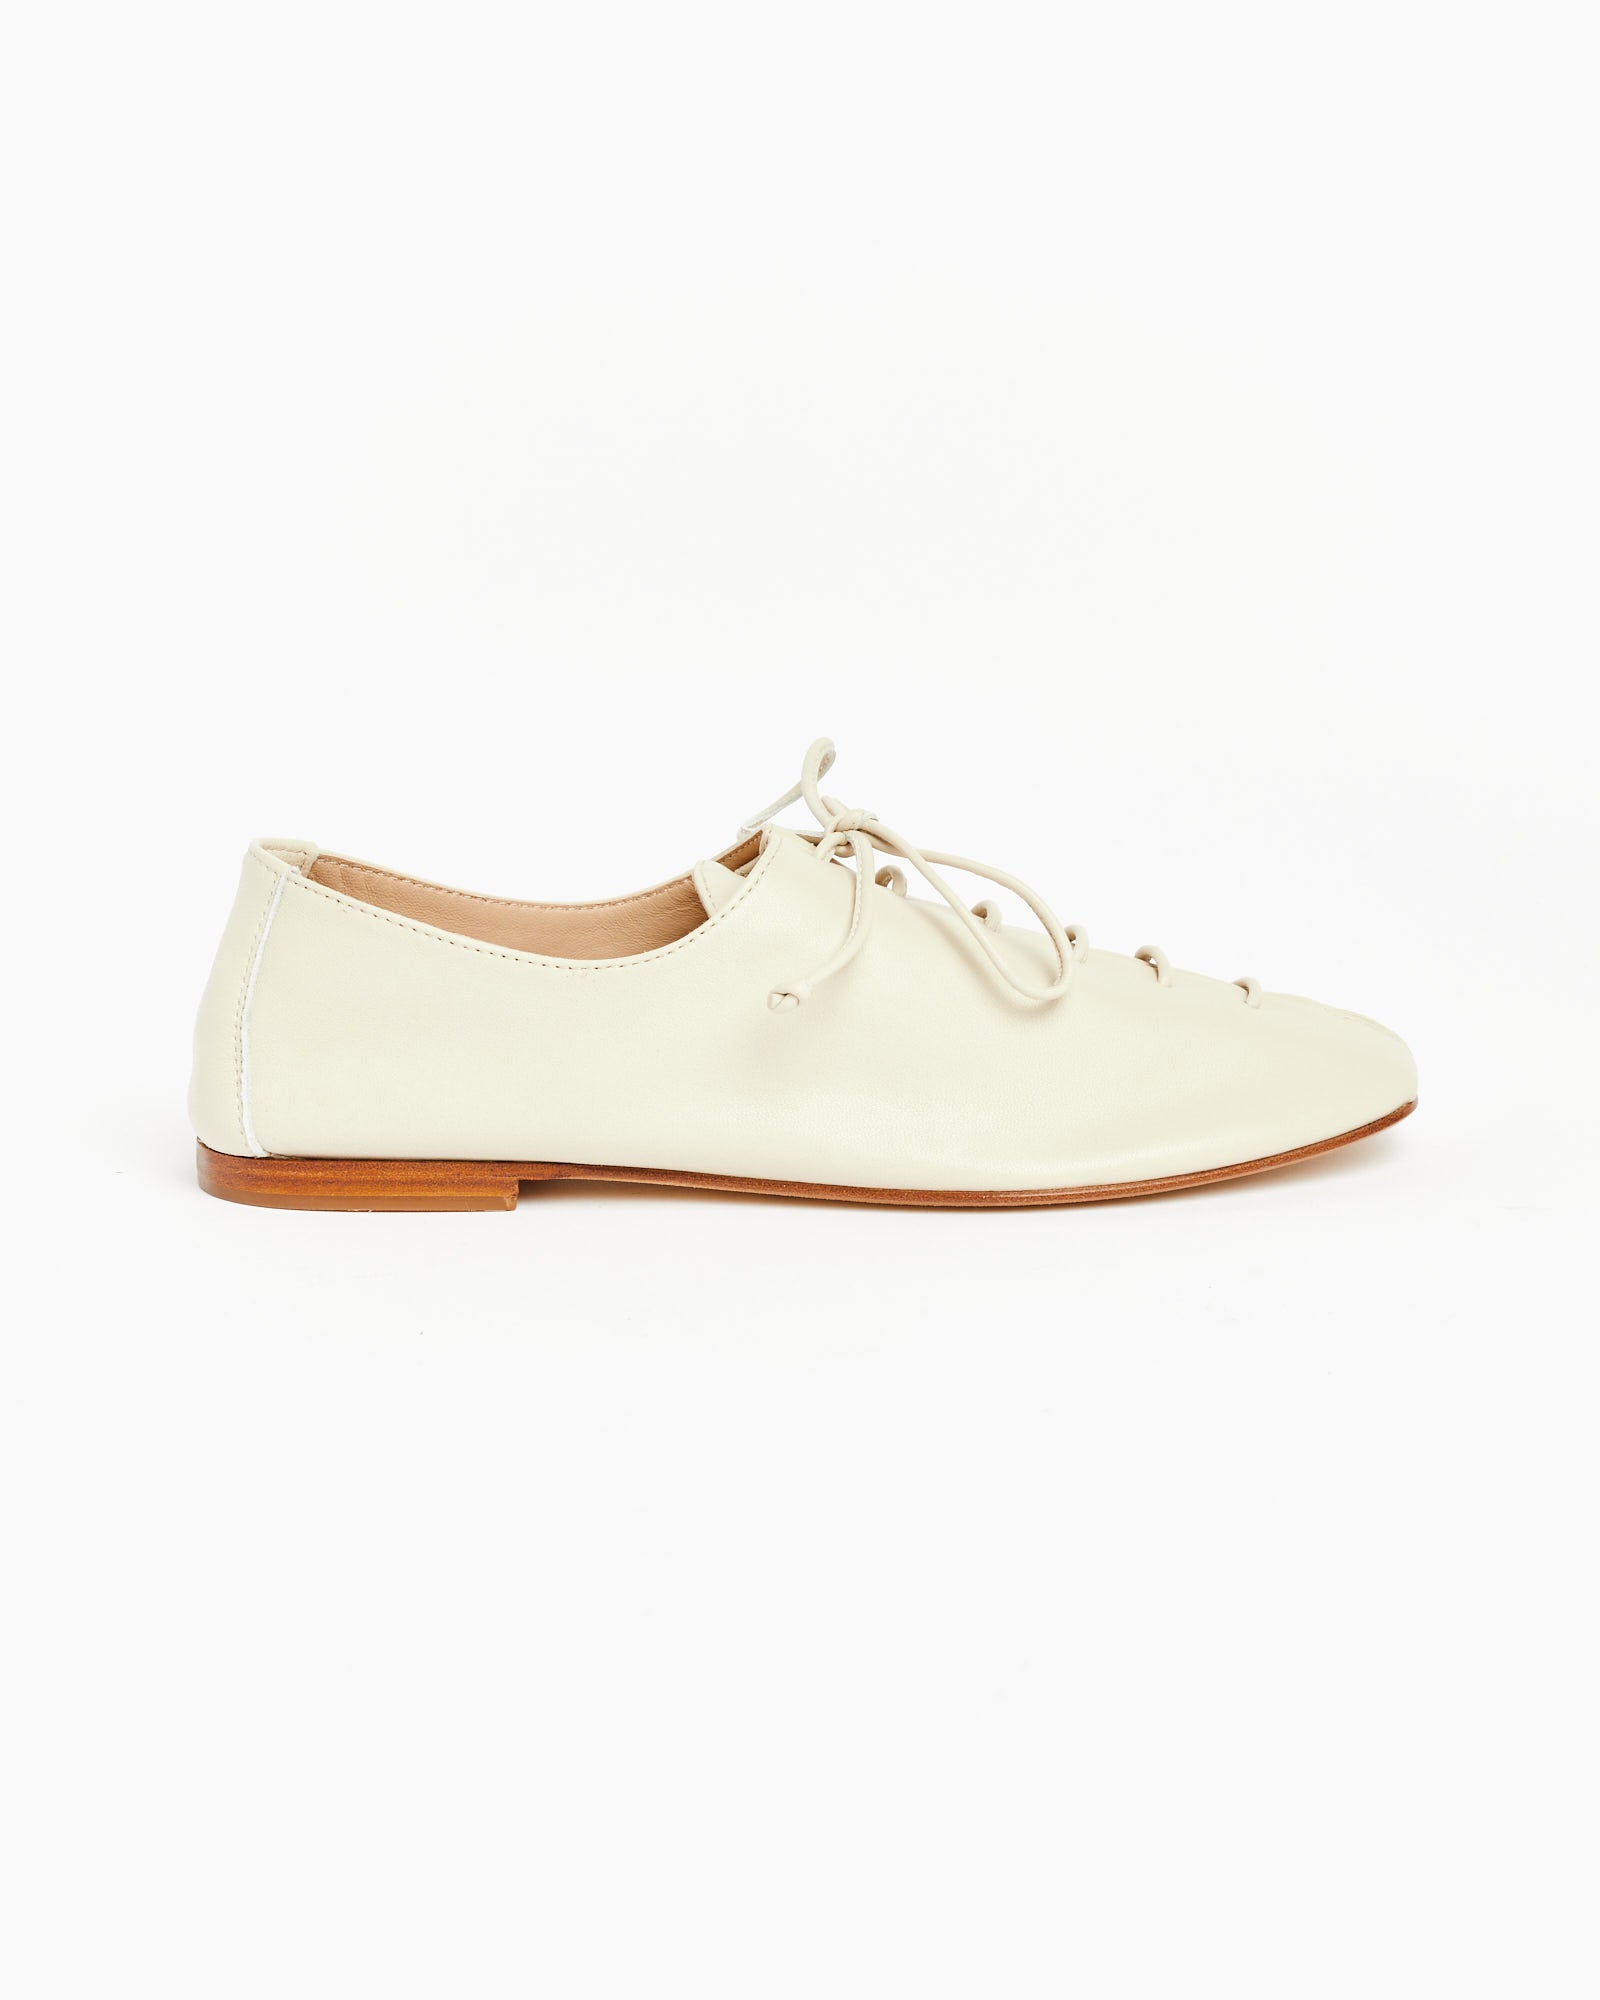 Plegada Deconstructed Lace-up Shoe in Cream